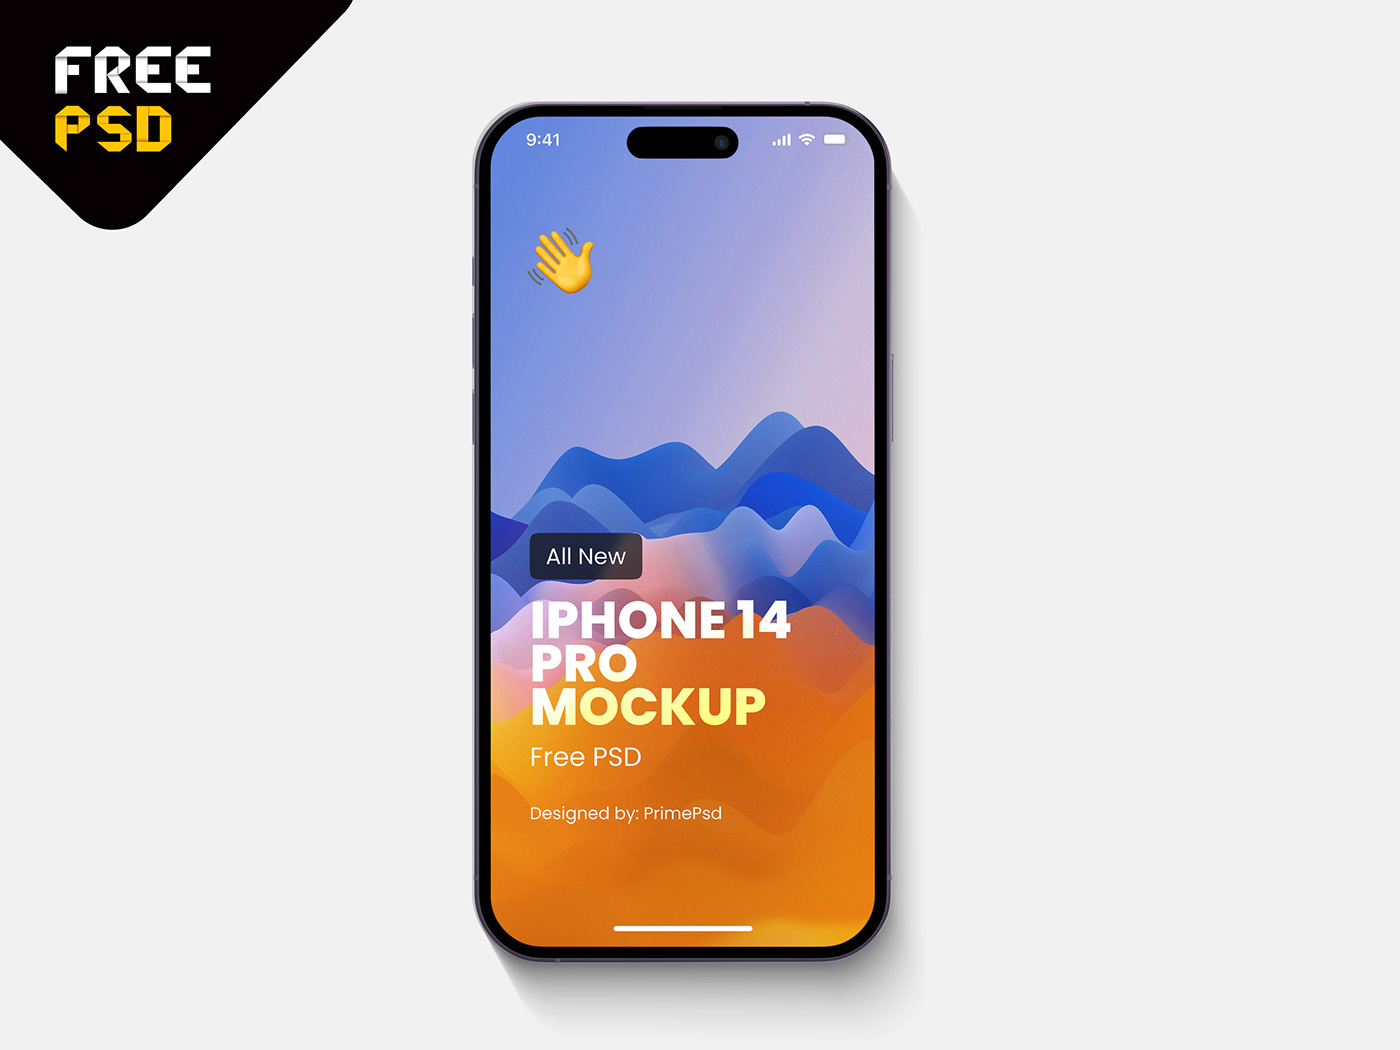 iphone 14 iphone 14 font view iphone 14 mockup iphone 14 mockup psd iphone 14 pro iphone 14 pro mockup iphone 14 psd primepsd